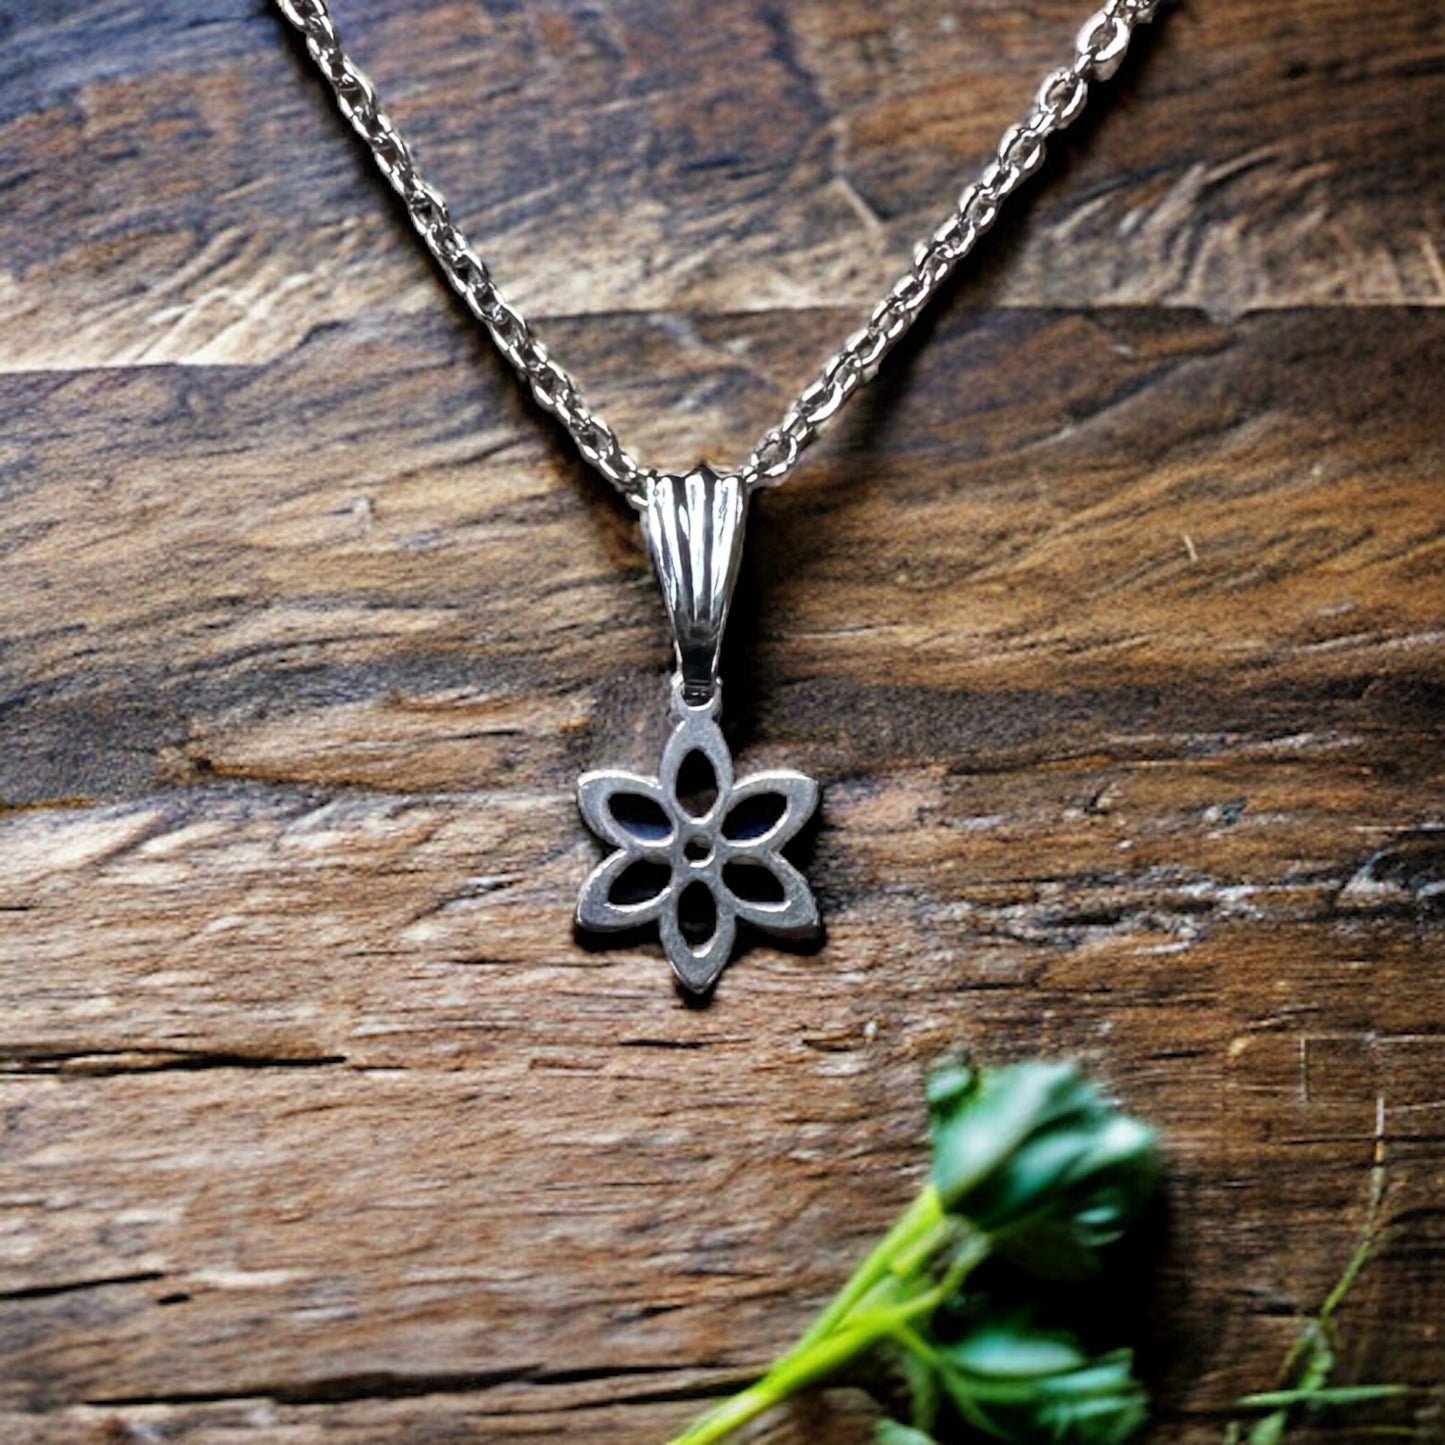 Stainless Steel Flower Charm Necklace